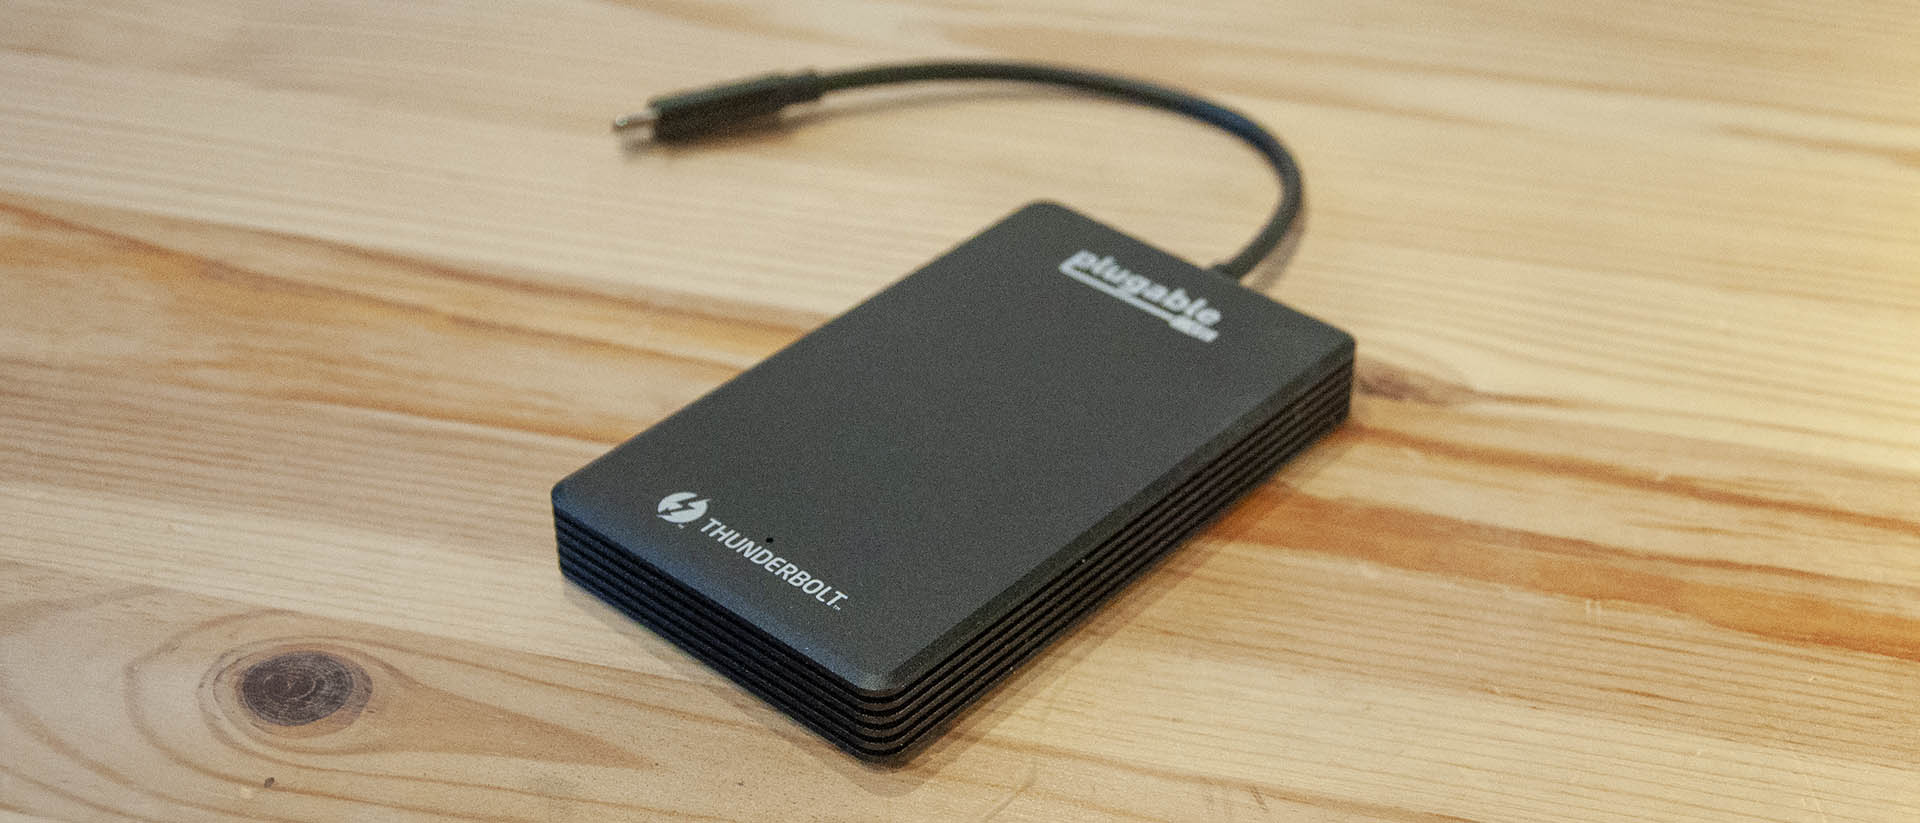 Up to 2400MBs/1800MBs R/W Plugable 512GB Thunderbolt 3 External SSD NVMe Drive 